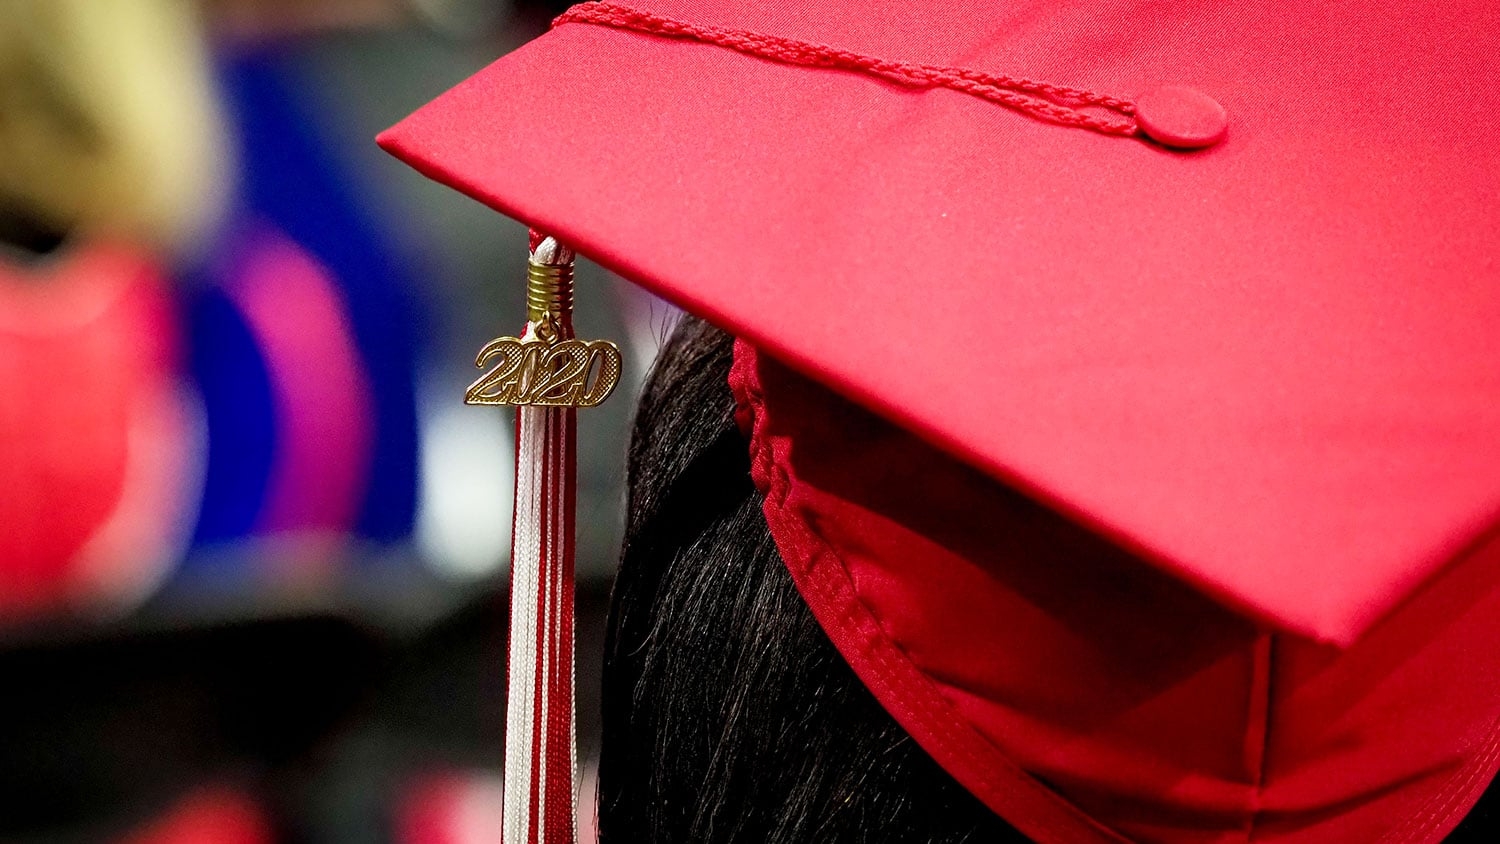 close-up image of 2020 graduate's mortarboard